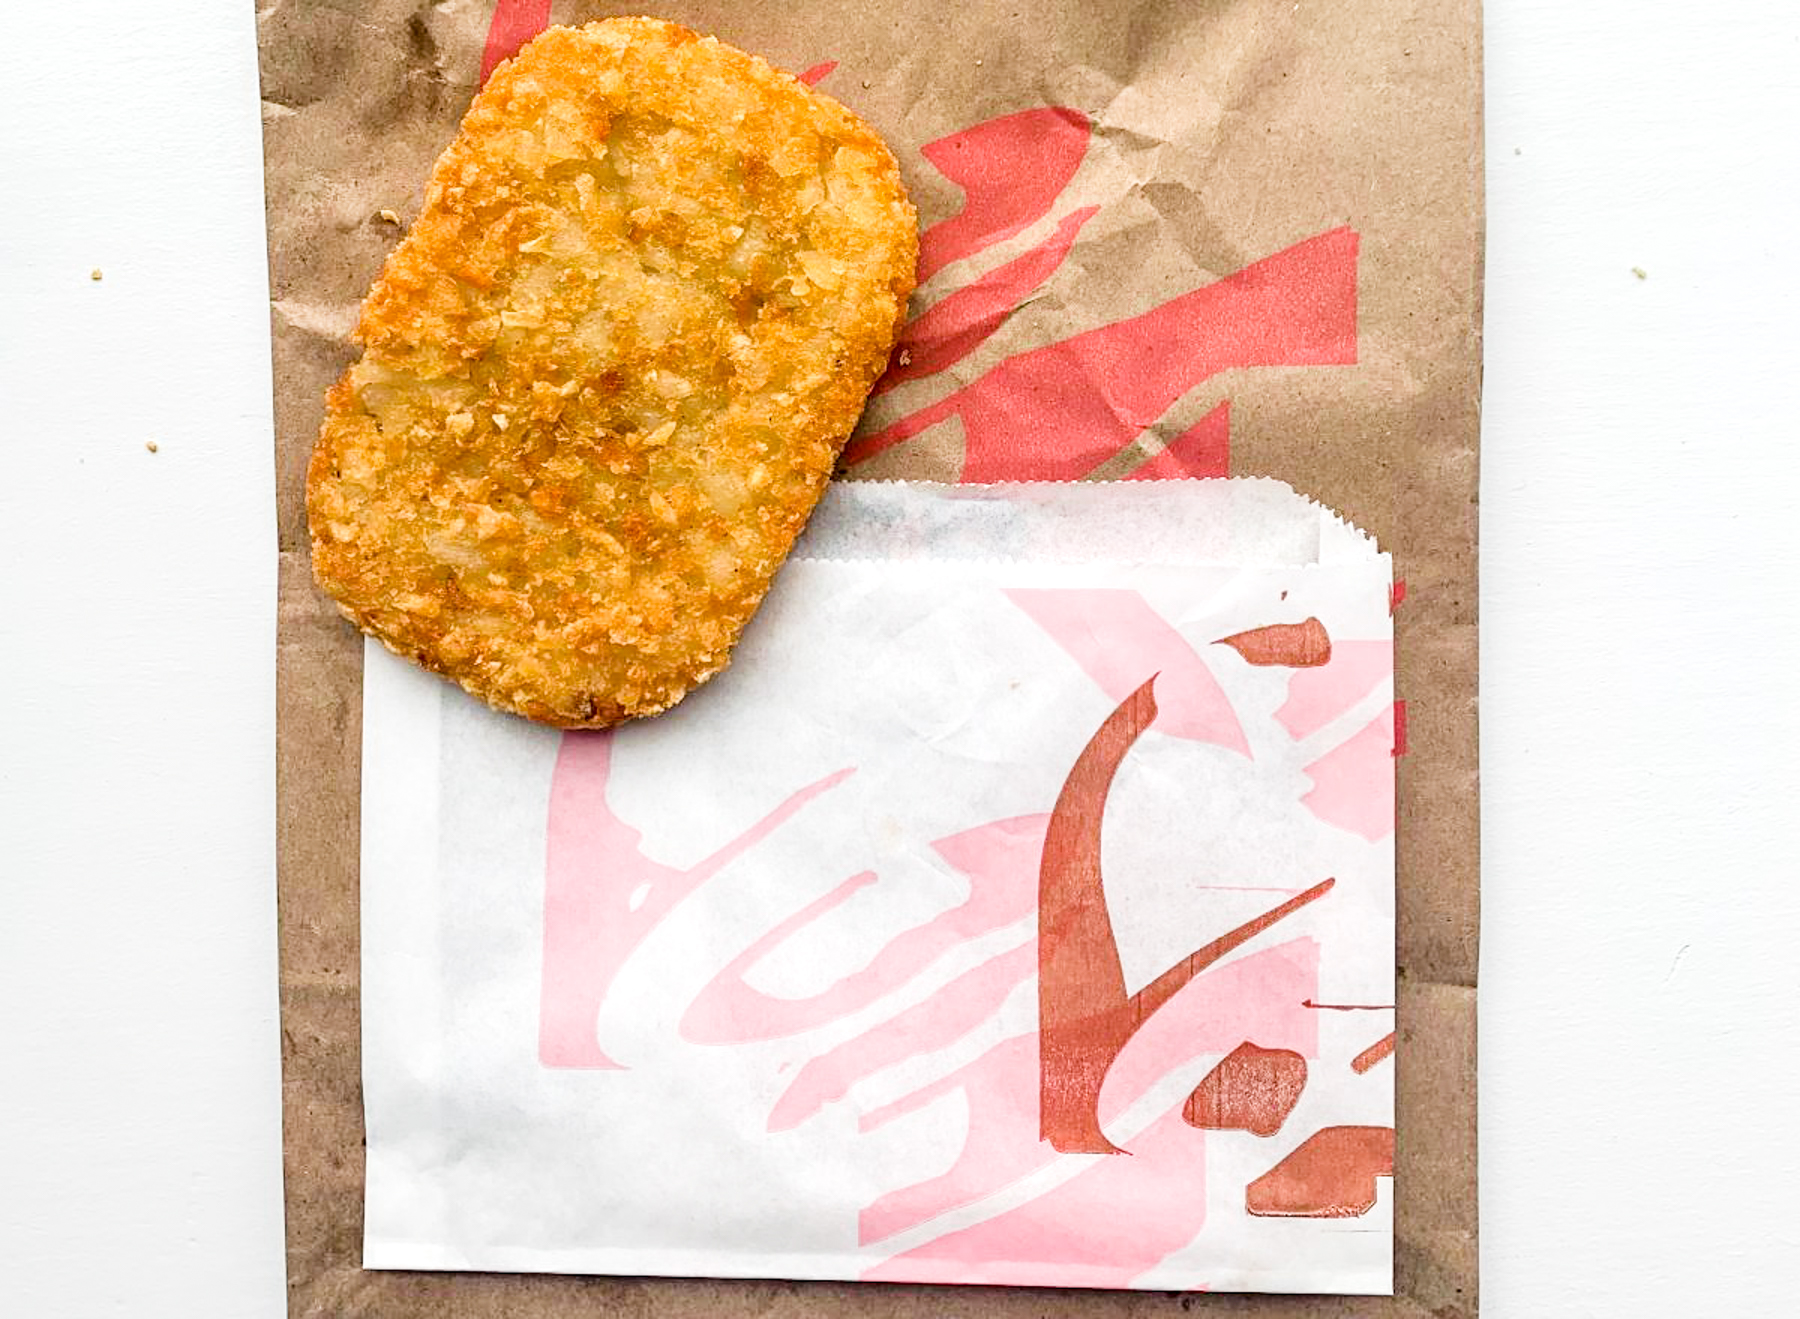 I Tasted 5 Fast-Food Hash Browns, and This One Is The Best